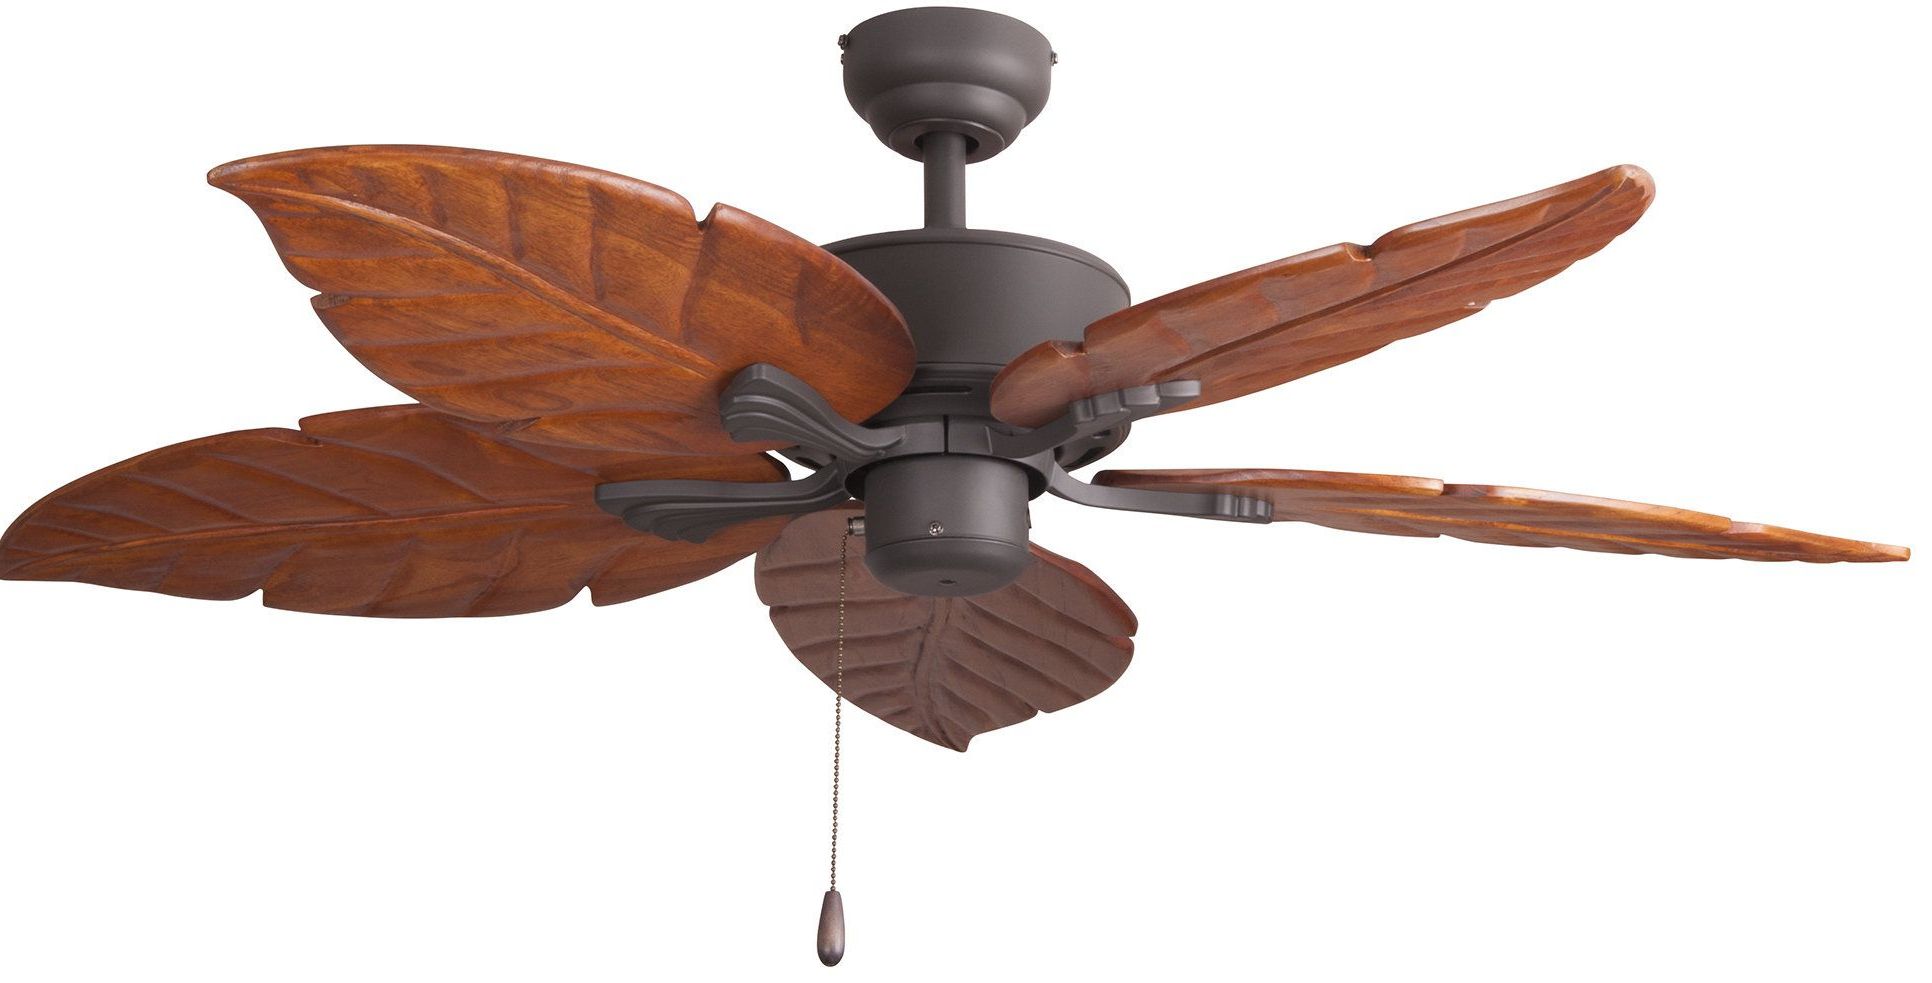 52" Kalista Indoor 5 Blade Ceiling Fan With Remote With Recent Kalista 5 Blade Ceiling Fans (View 2 of 20)